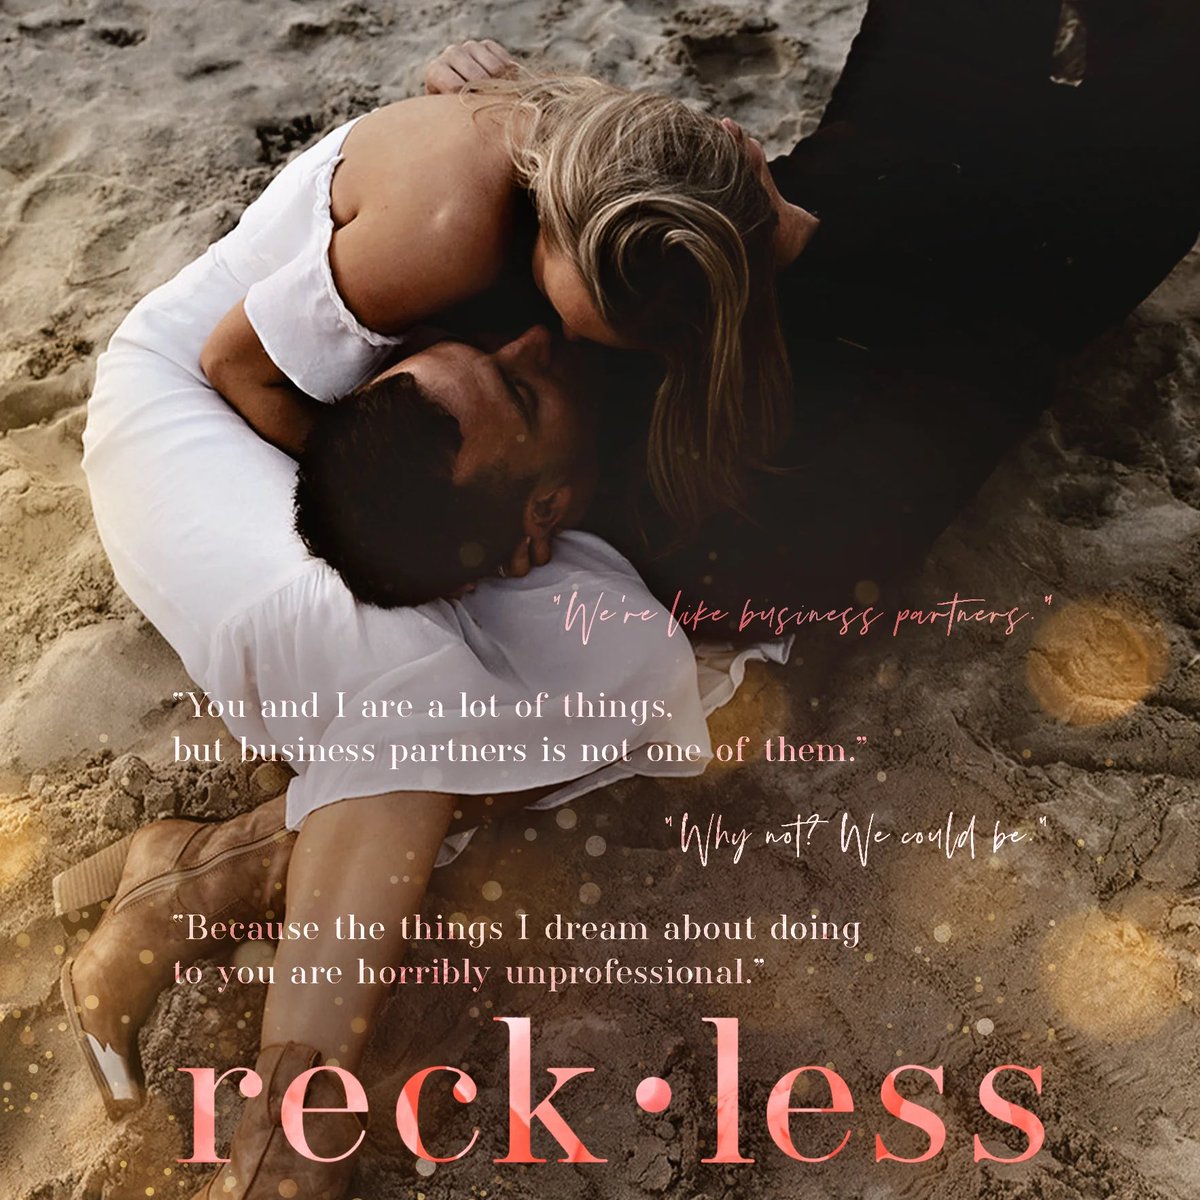 This steamy, small town romance will be available for purchase on June 9th!
Reckless by #elsiesilver 
Pre-order your copy here: geni.us/getreckless

✨ Grumpy Sunshine
✨ Single Mom / Secret Baby
✨ Reformed Playboy
✨ He Falls First
✨ One Night Stand